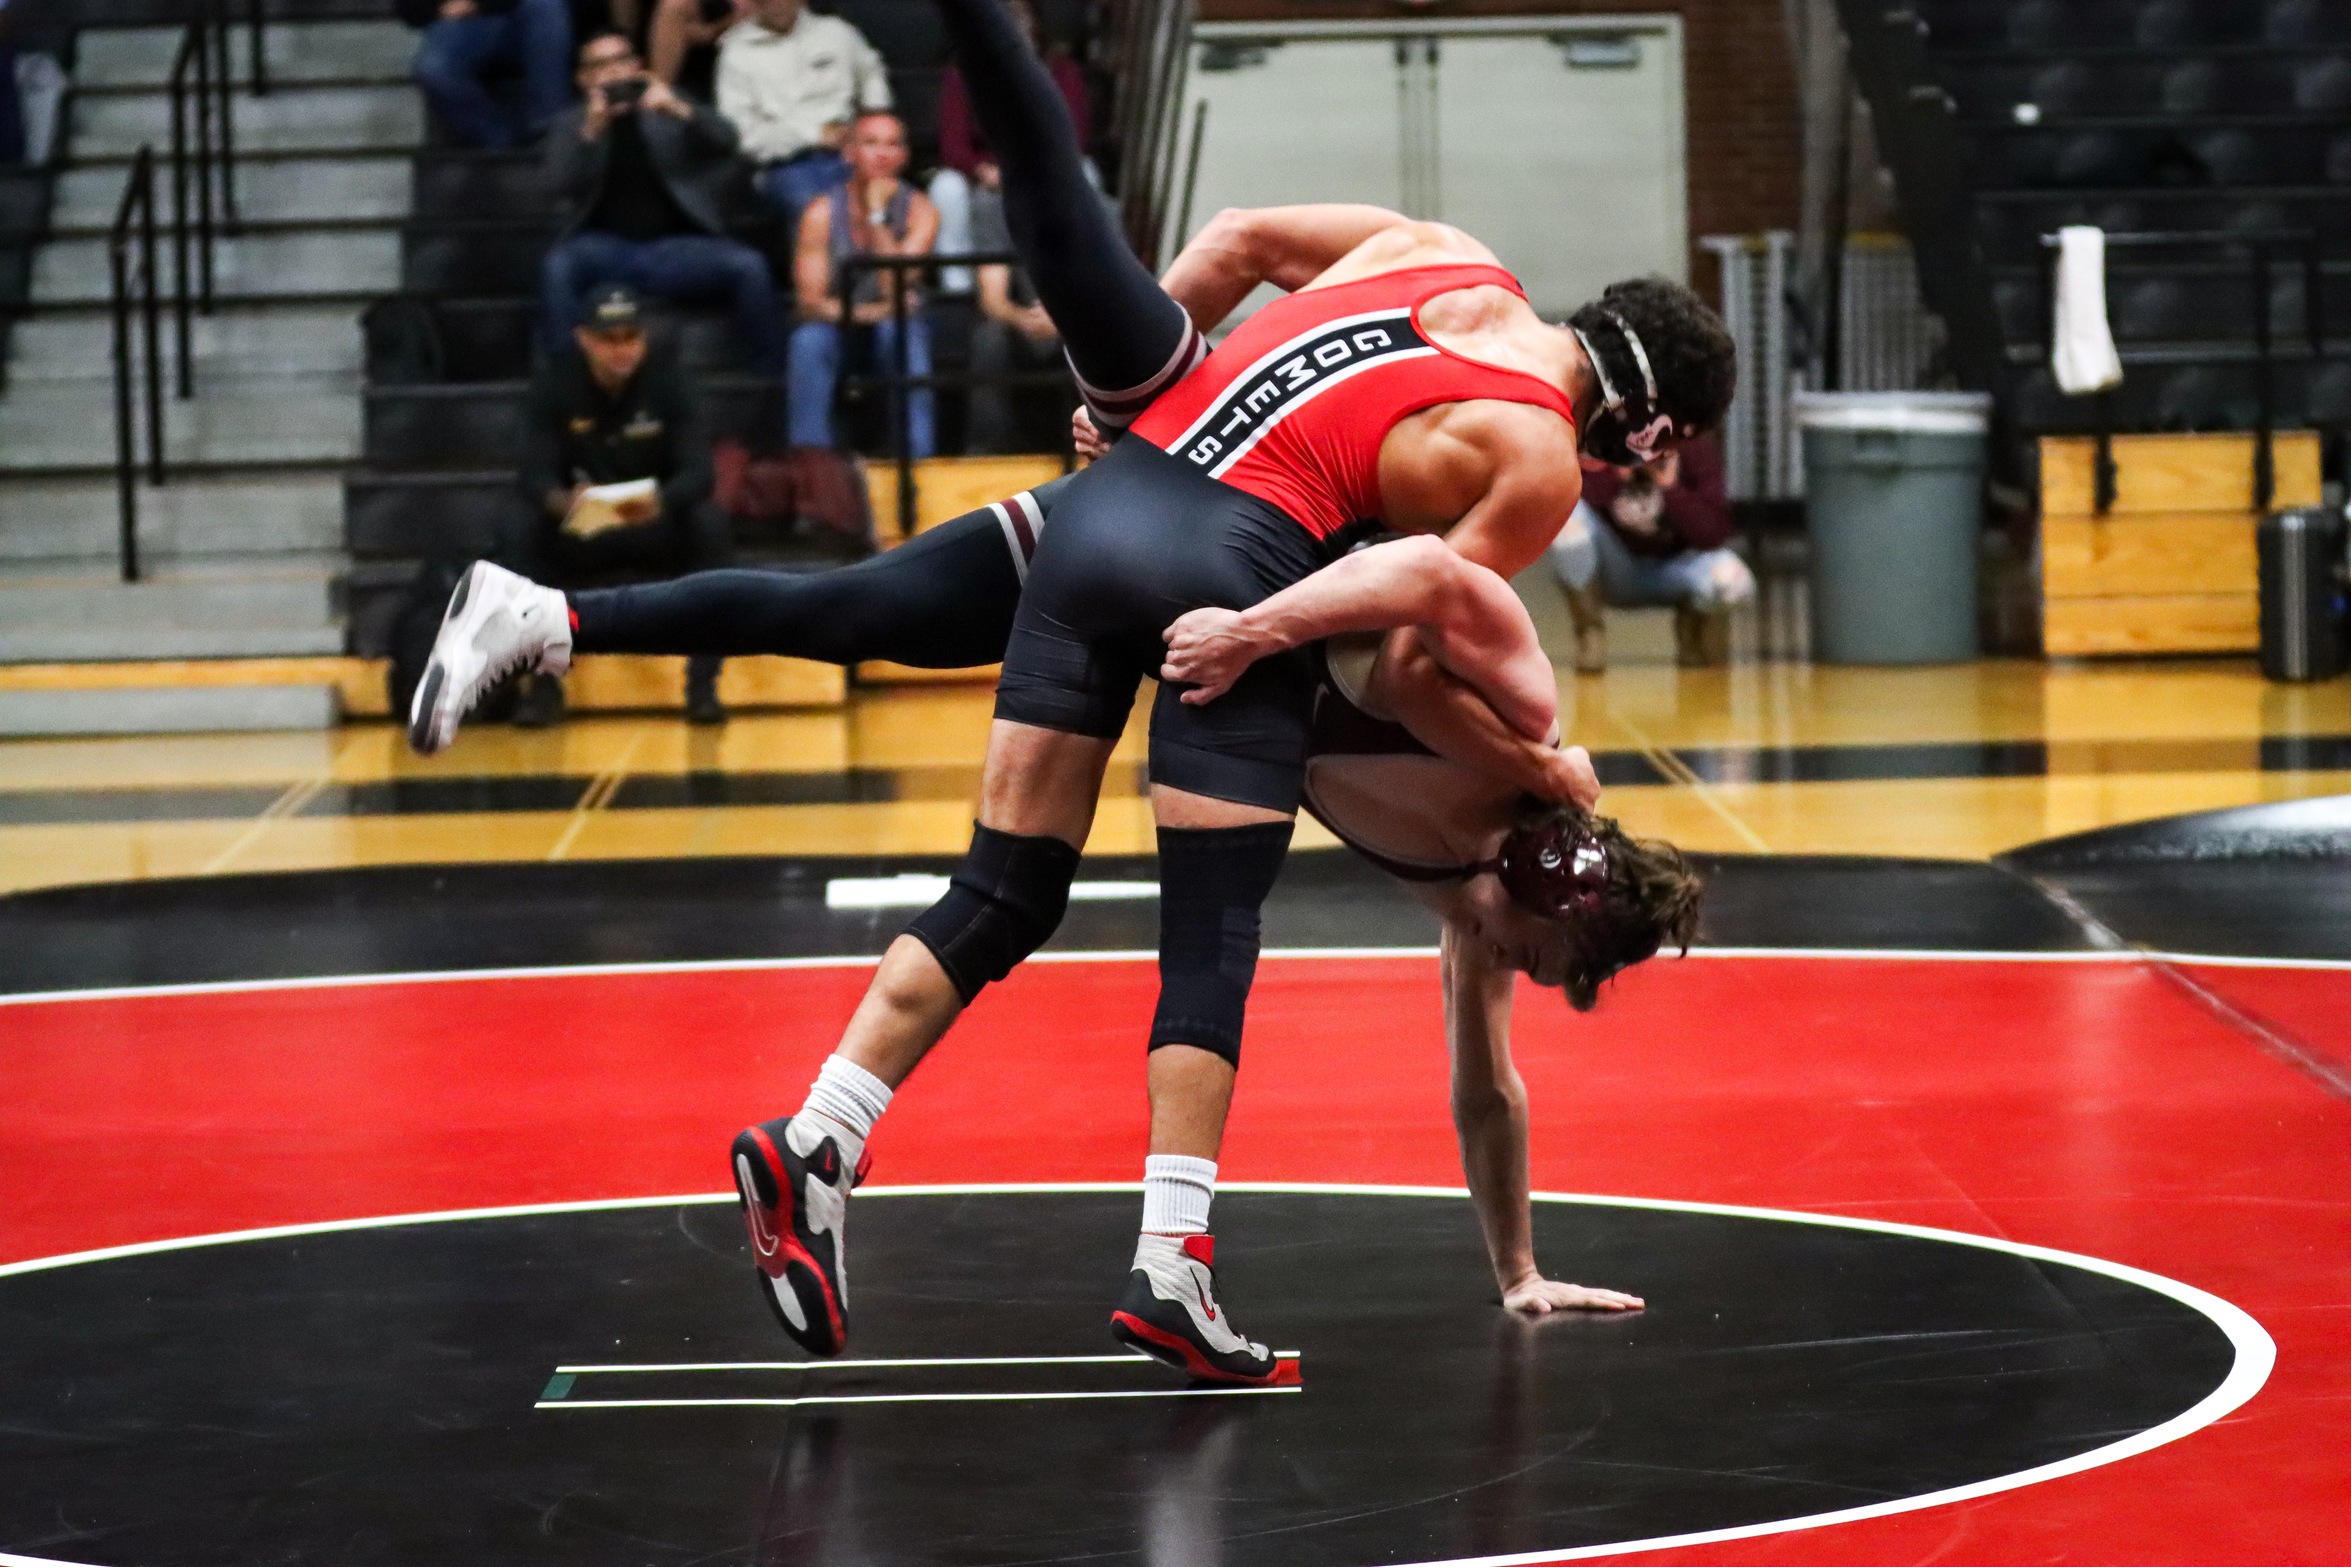 Anthony Perez had a second-place finish at the Bill Musick Open. Photo by Cara Heise.